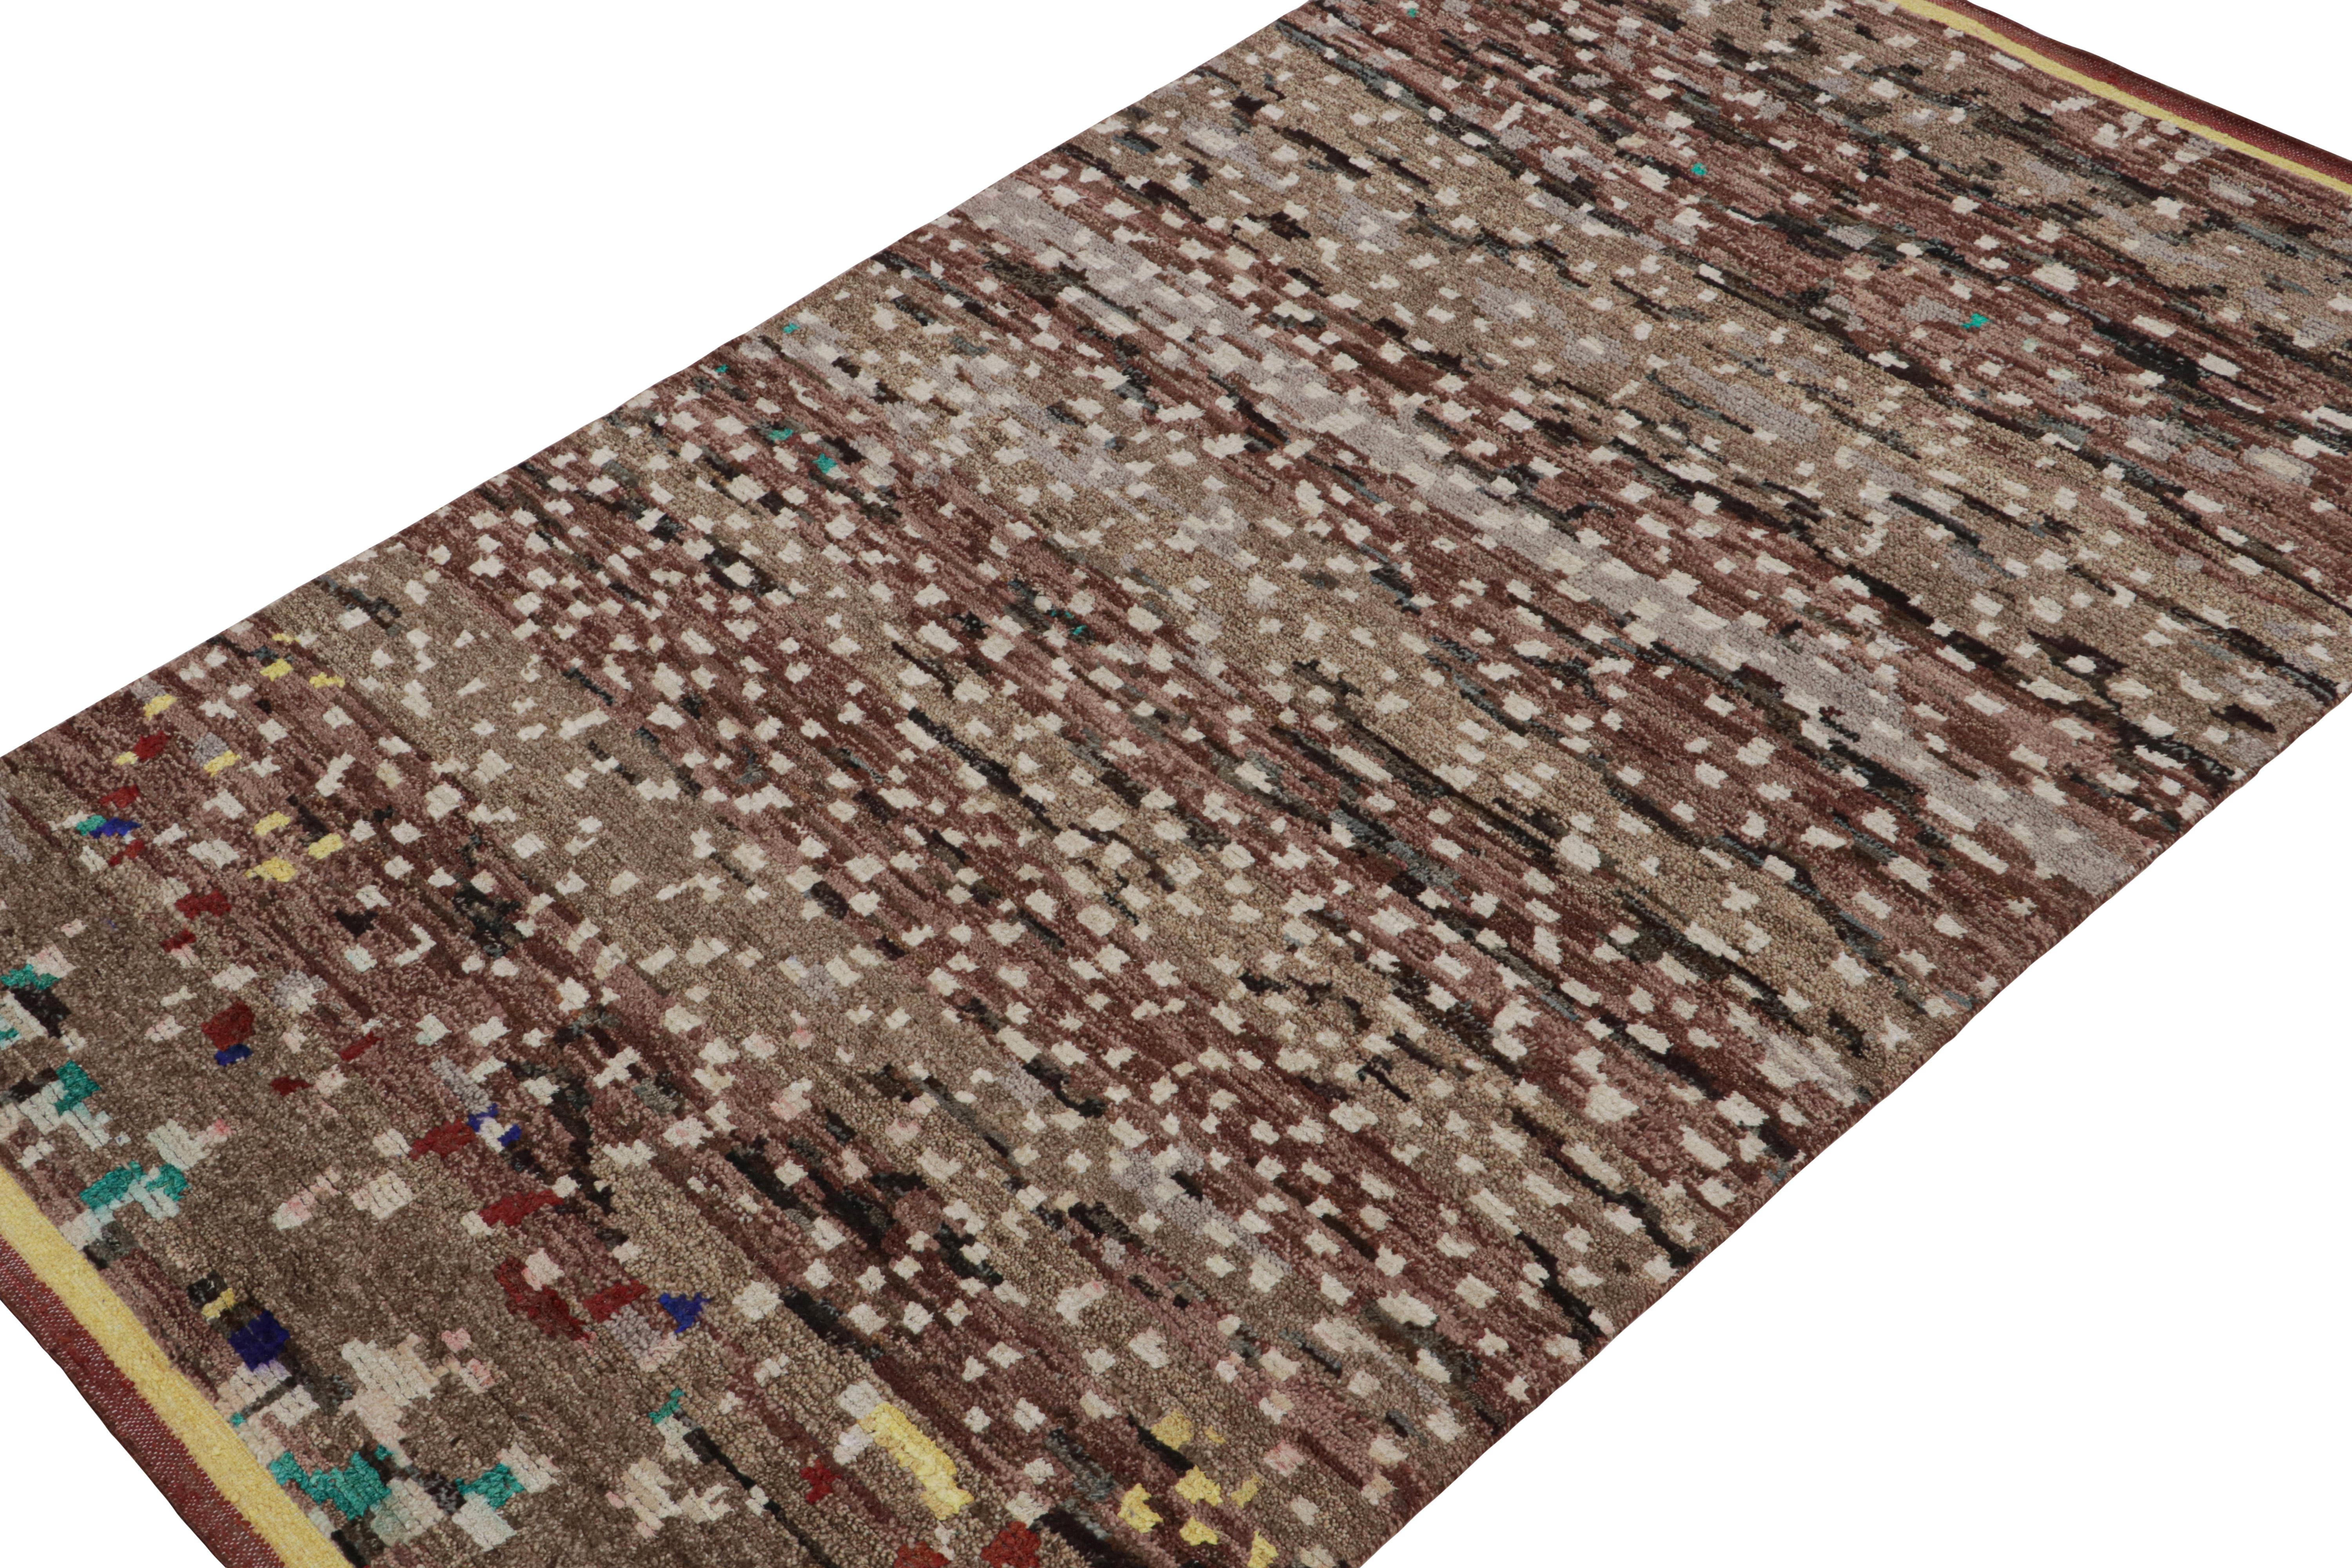 Hand-knotted in wool, silk & cotton, this 5x9 rug is a new addition to the Moroccan Collection by Rug & Kilim. 

On the Design:

This rug enjoys primitivist style with patterns in tones of brown, red, white, black & gray. Connoisseurs will admire